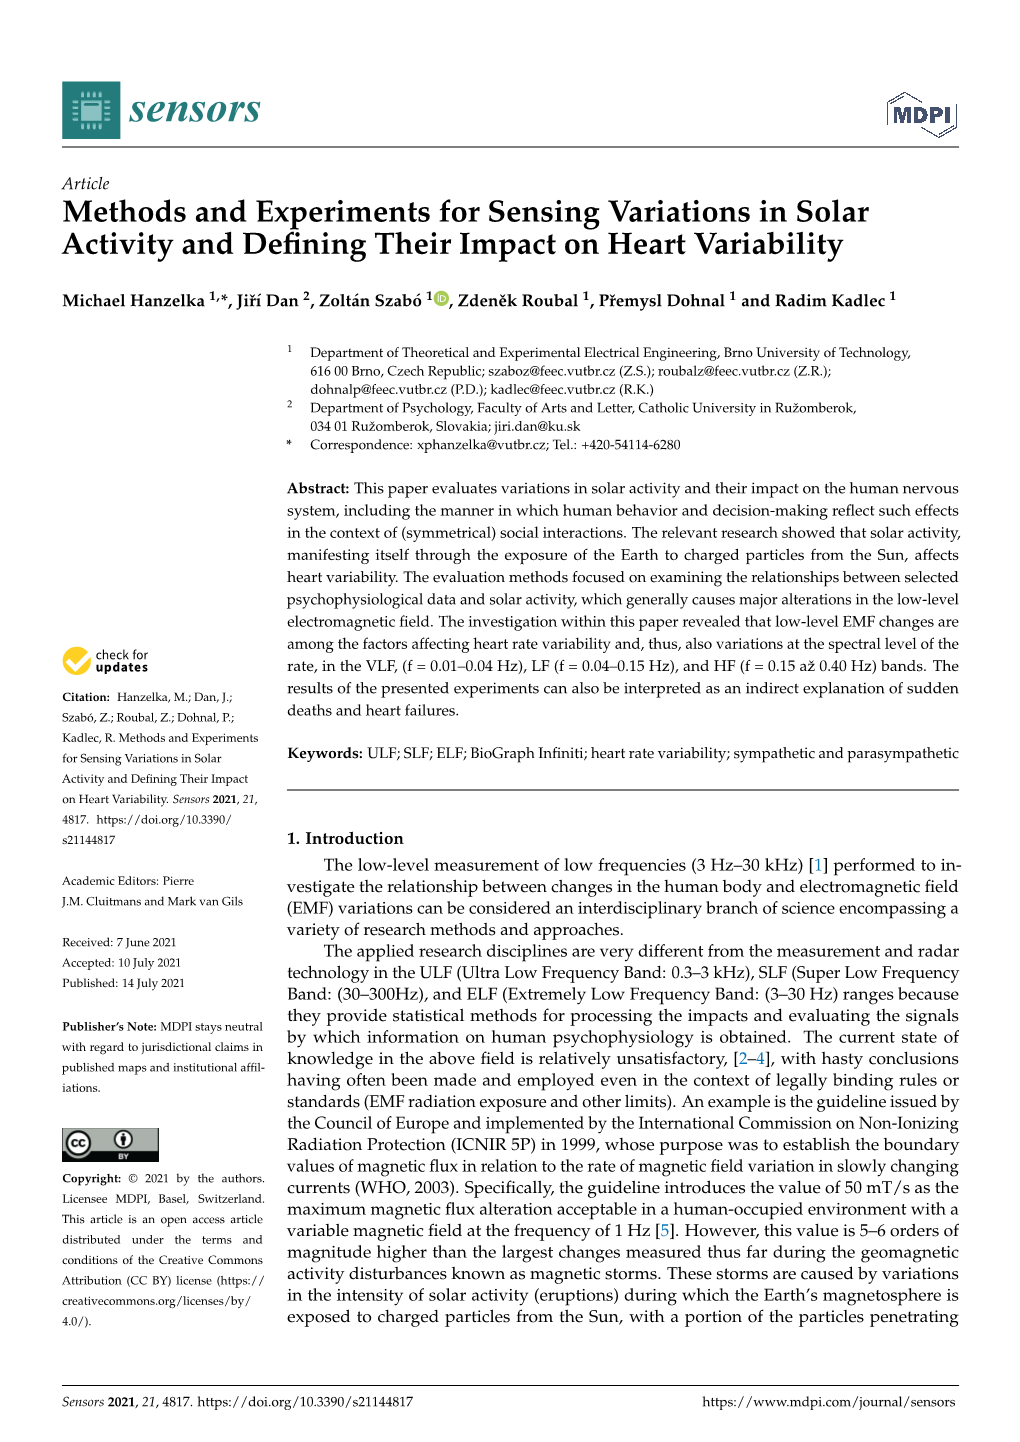 Methods and Experiments for Sensing Variations in Solar Activity and Deﬁning Their Impact on Heart Variability